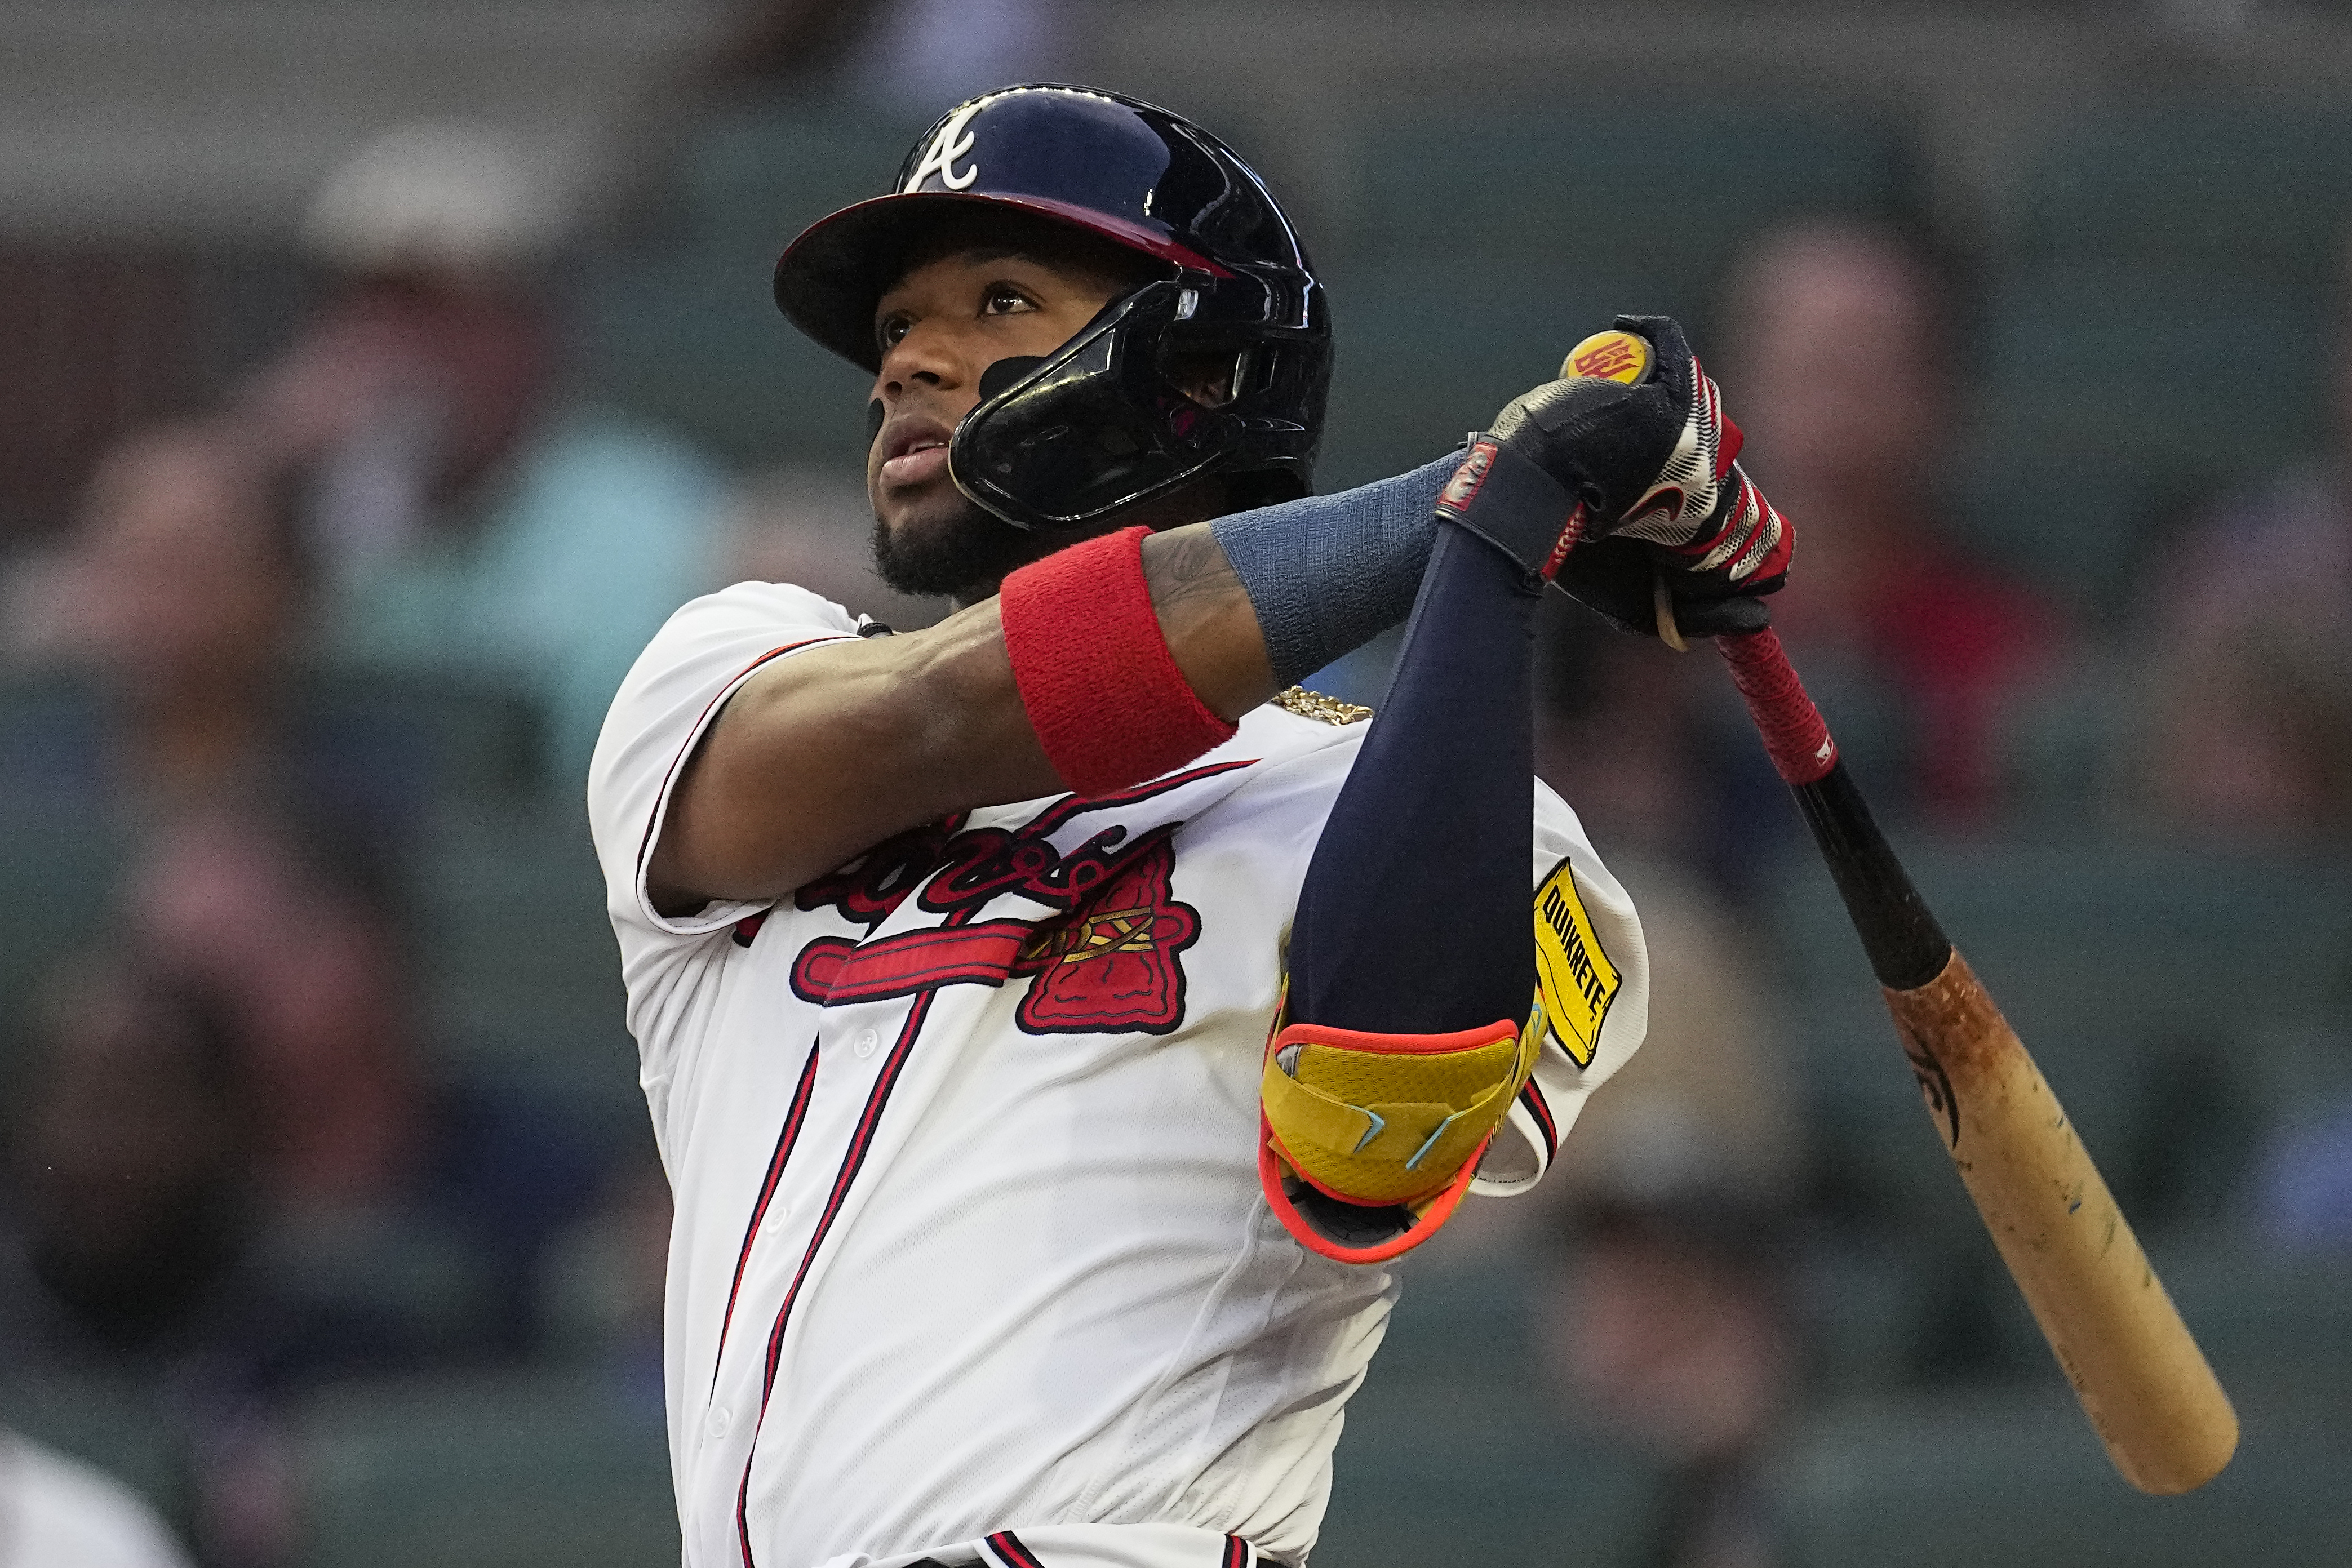 Have You Seen This? Ronald Acuna Jr. becomes first member of 40-70